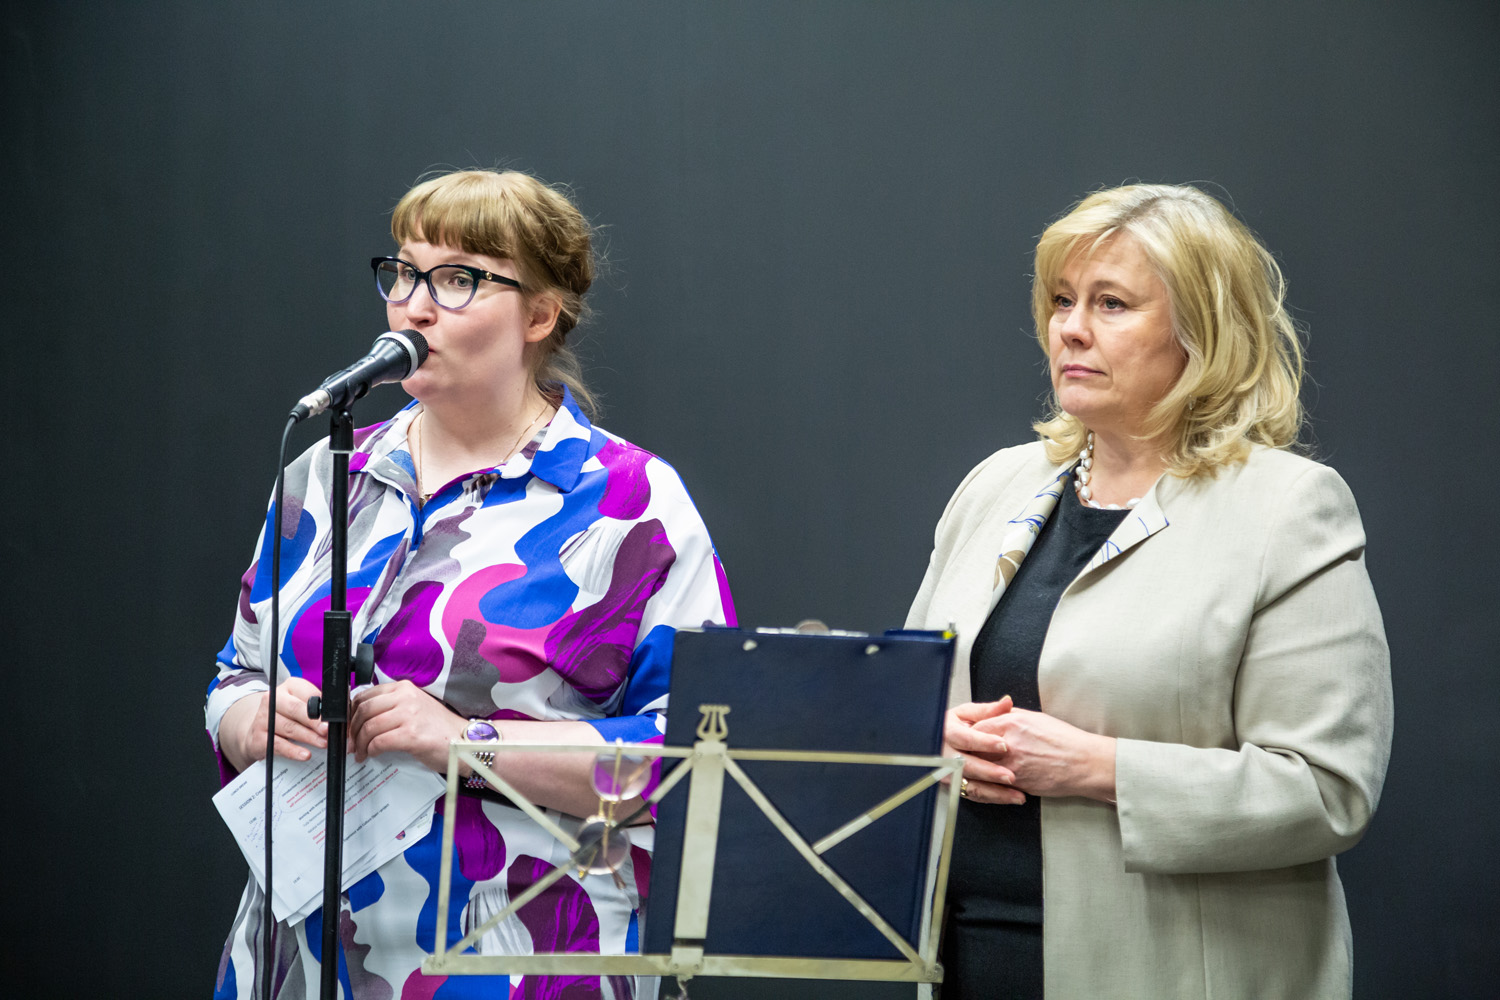 Project Coordinator and Director of Culture stand side by side in front of a microphone